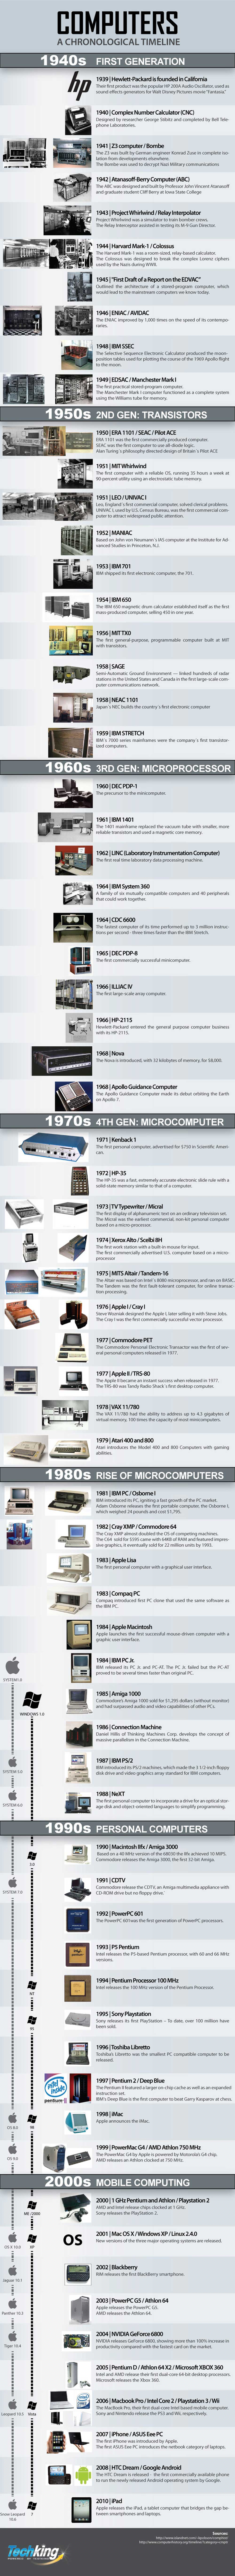 Computers: An Awesome Chronological Timeline [Infographic]